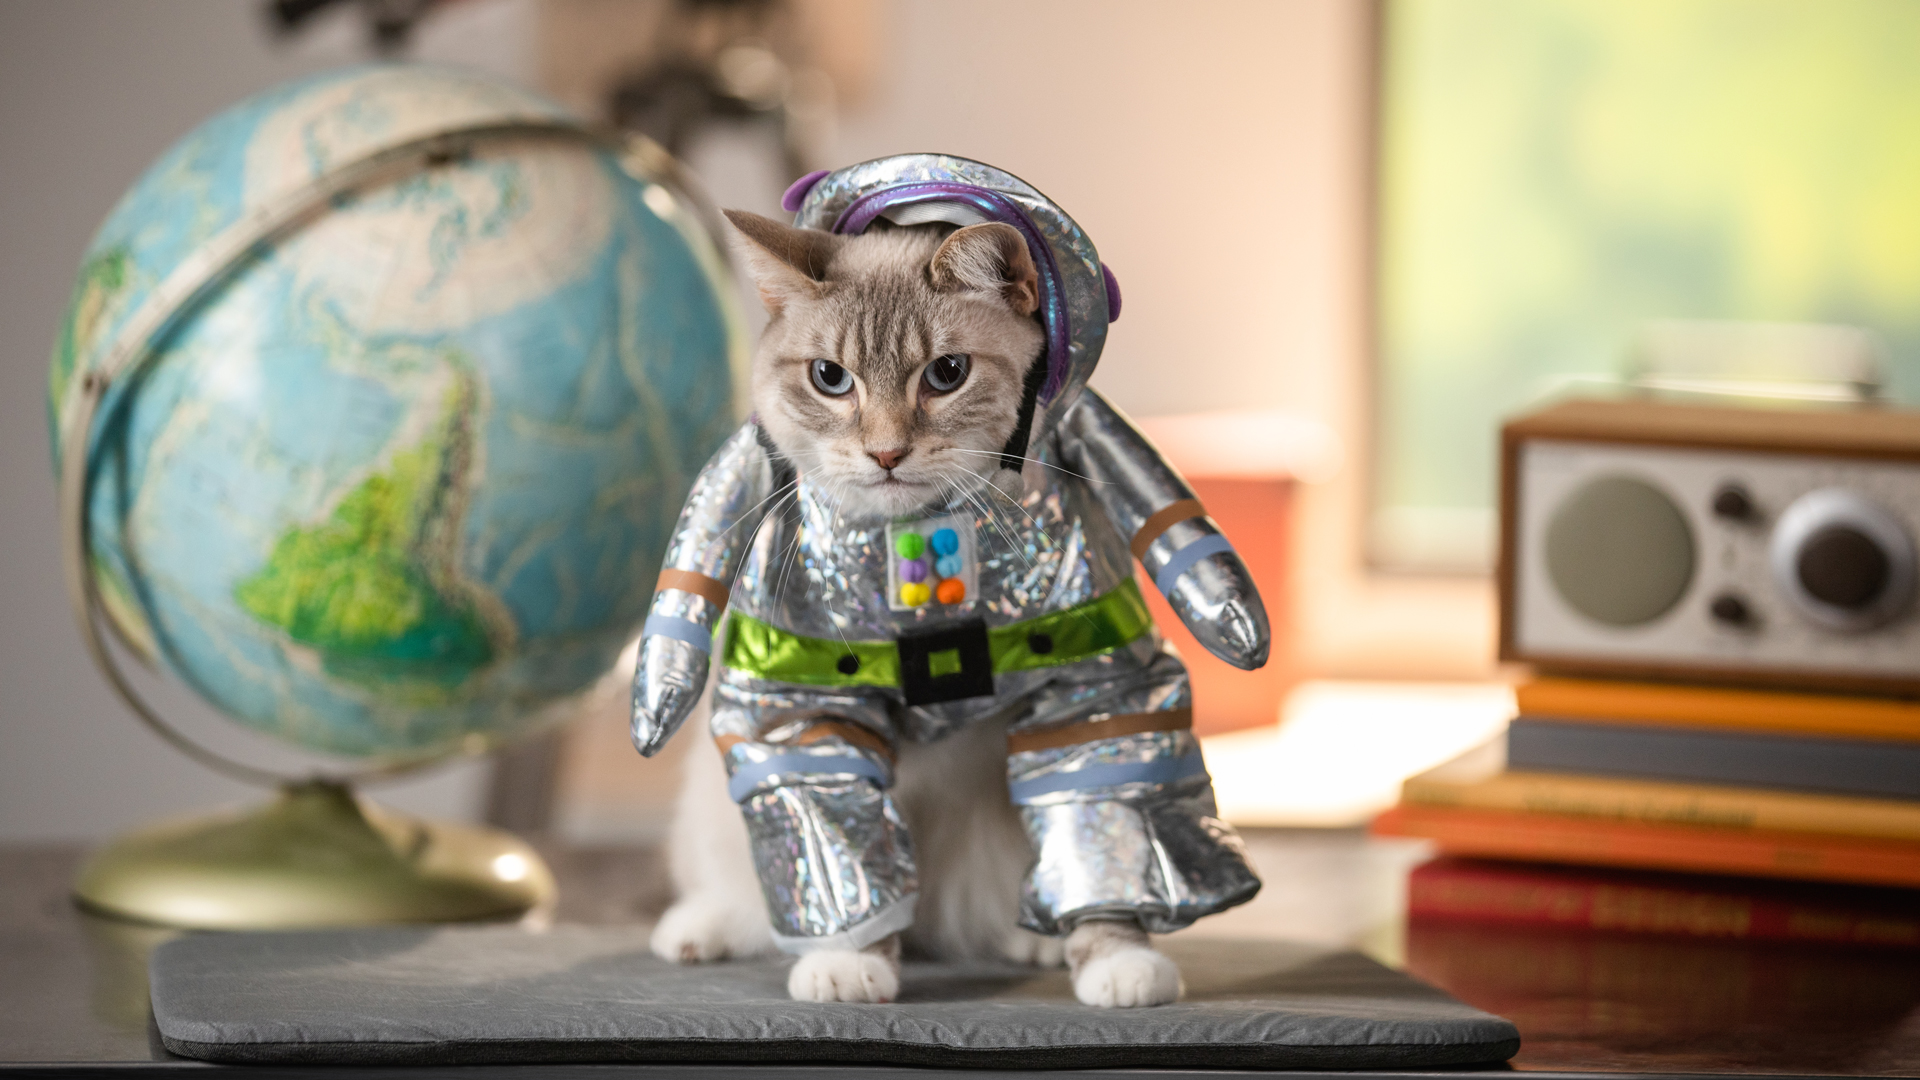 Cat in astronaut costume sitting on table